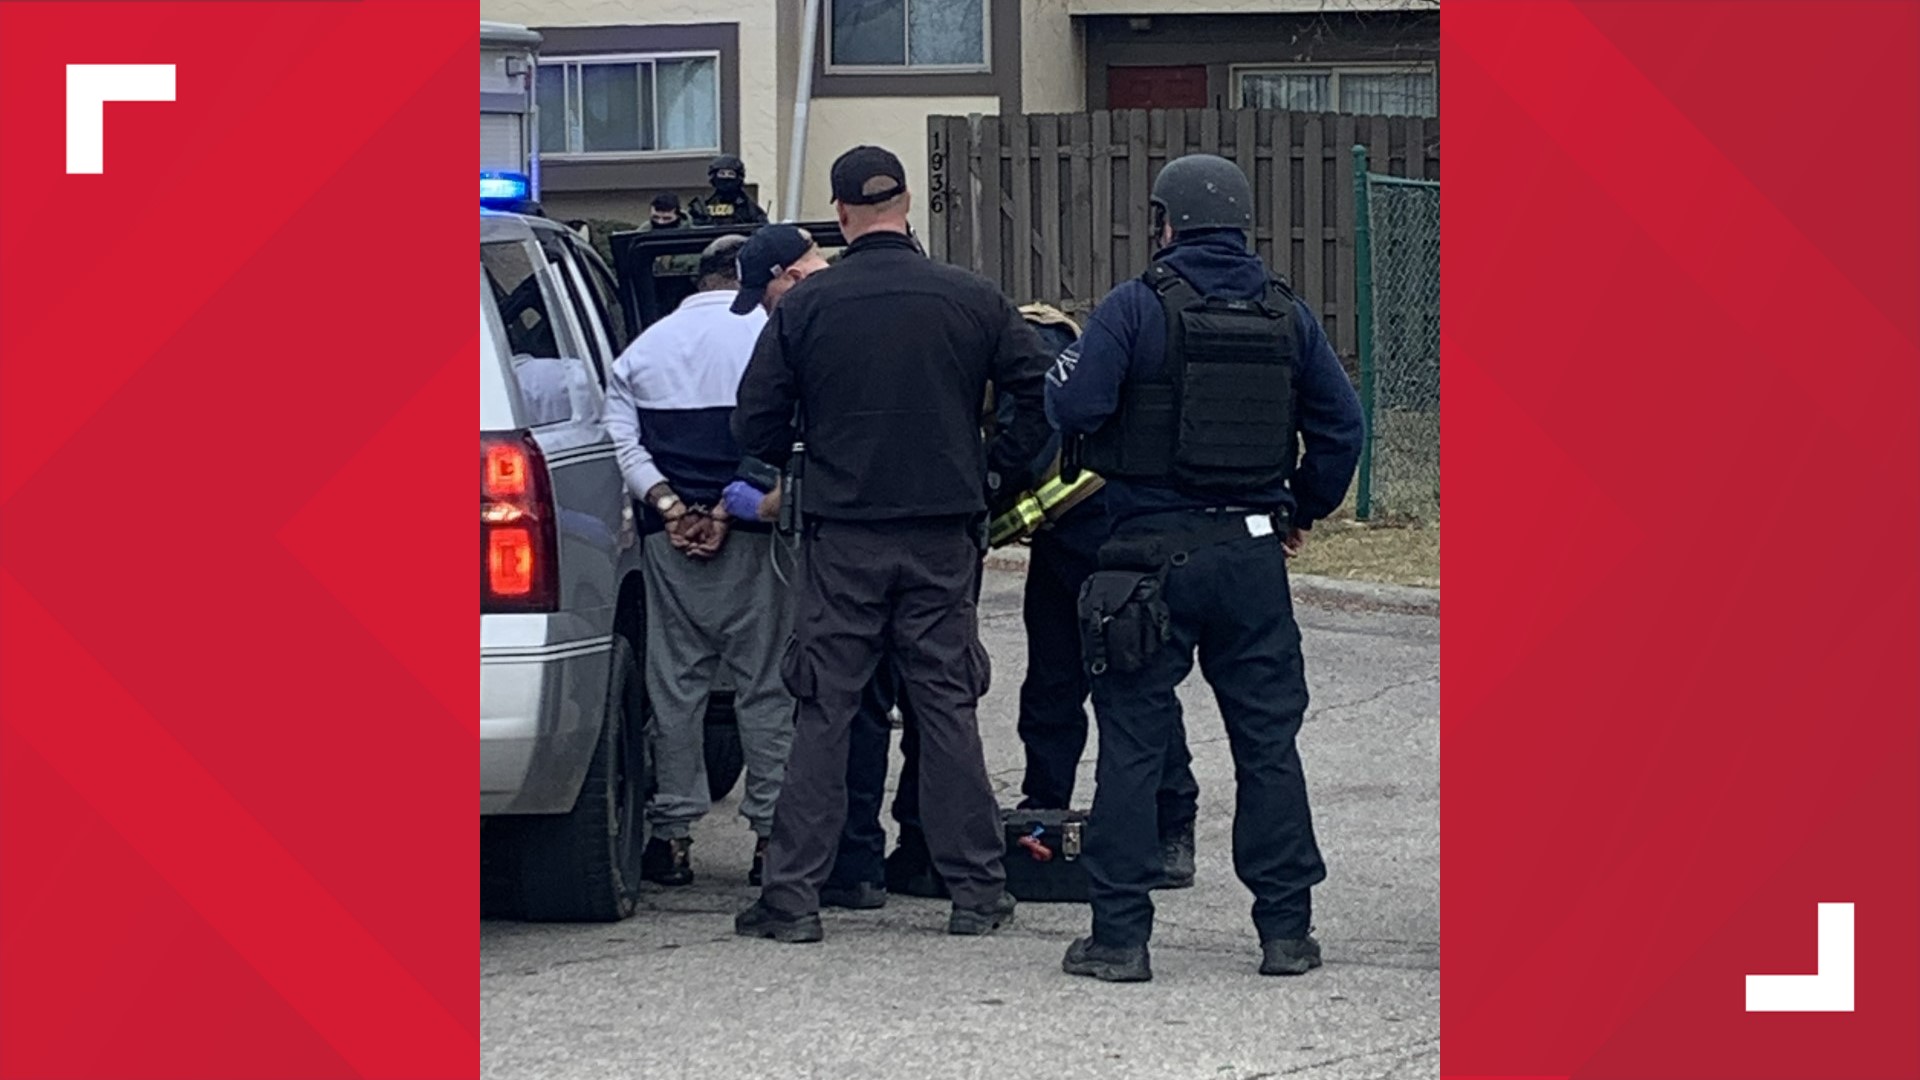 10TV was at the scene while DEA agents and troopers with the Ohio State Highway Patrol searched the apartment on Wednesday.